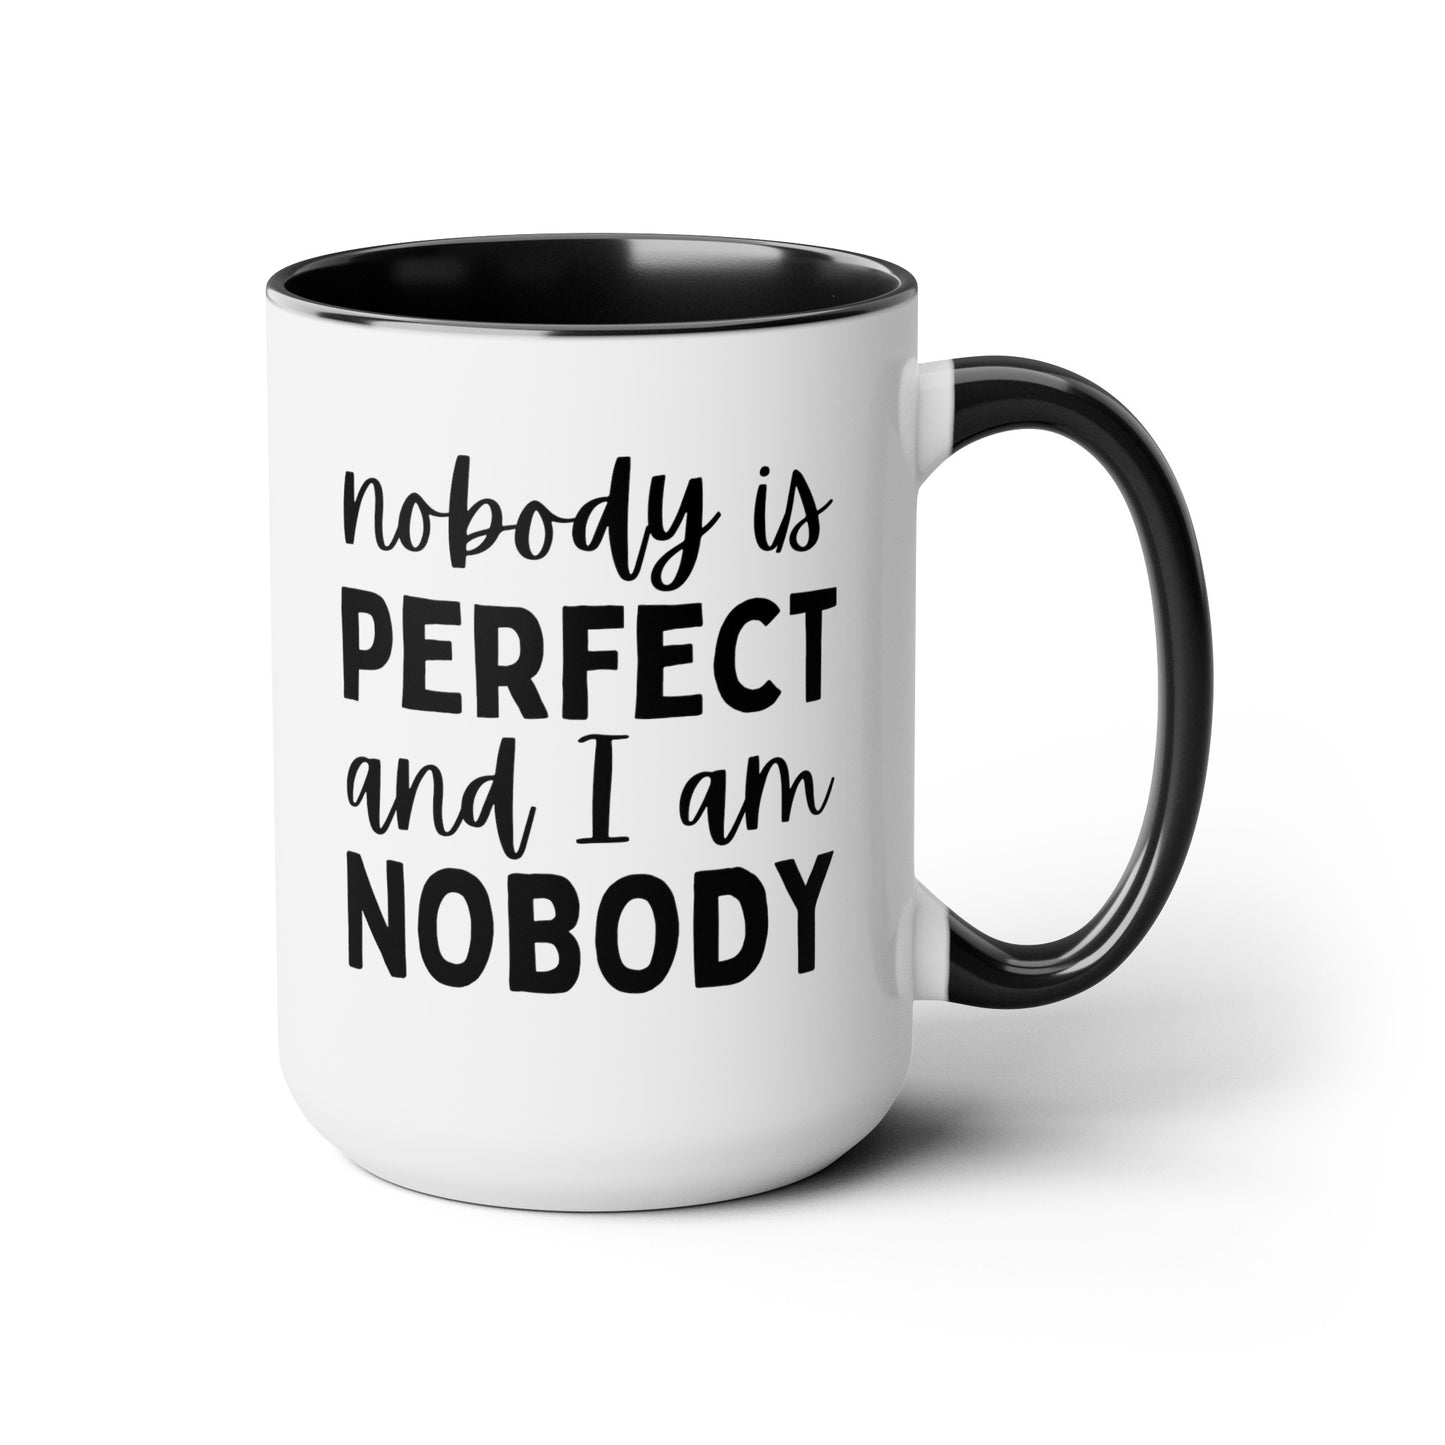 Nobody Is Perfect And I Am Nobody 15oz white with black accent funny large coffee mug gift for friend joke sassy BFF sarcastic birthday present novelty waveywares wavey wares wavywares wavy wares 